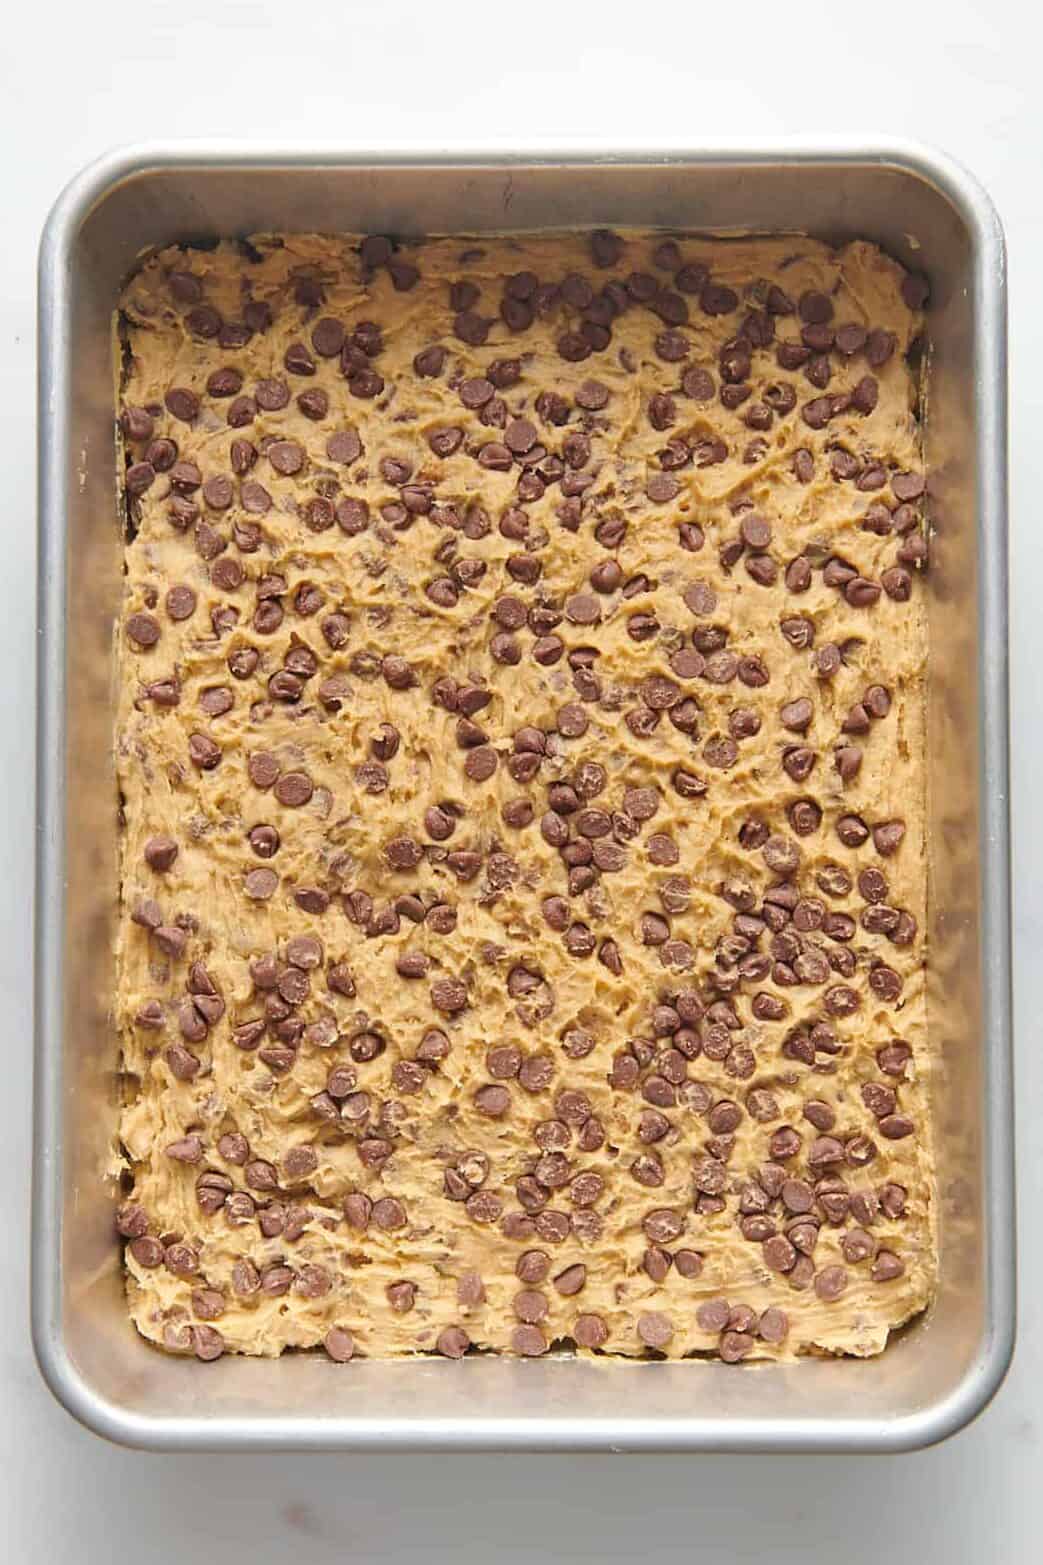 toll house chocolate chip cookie dough pressed into a 9x13 baking dish.